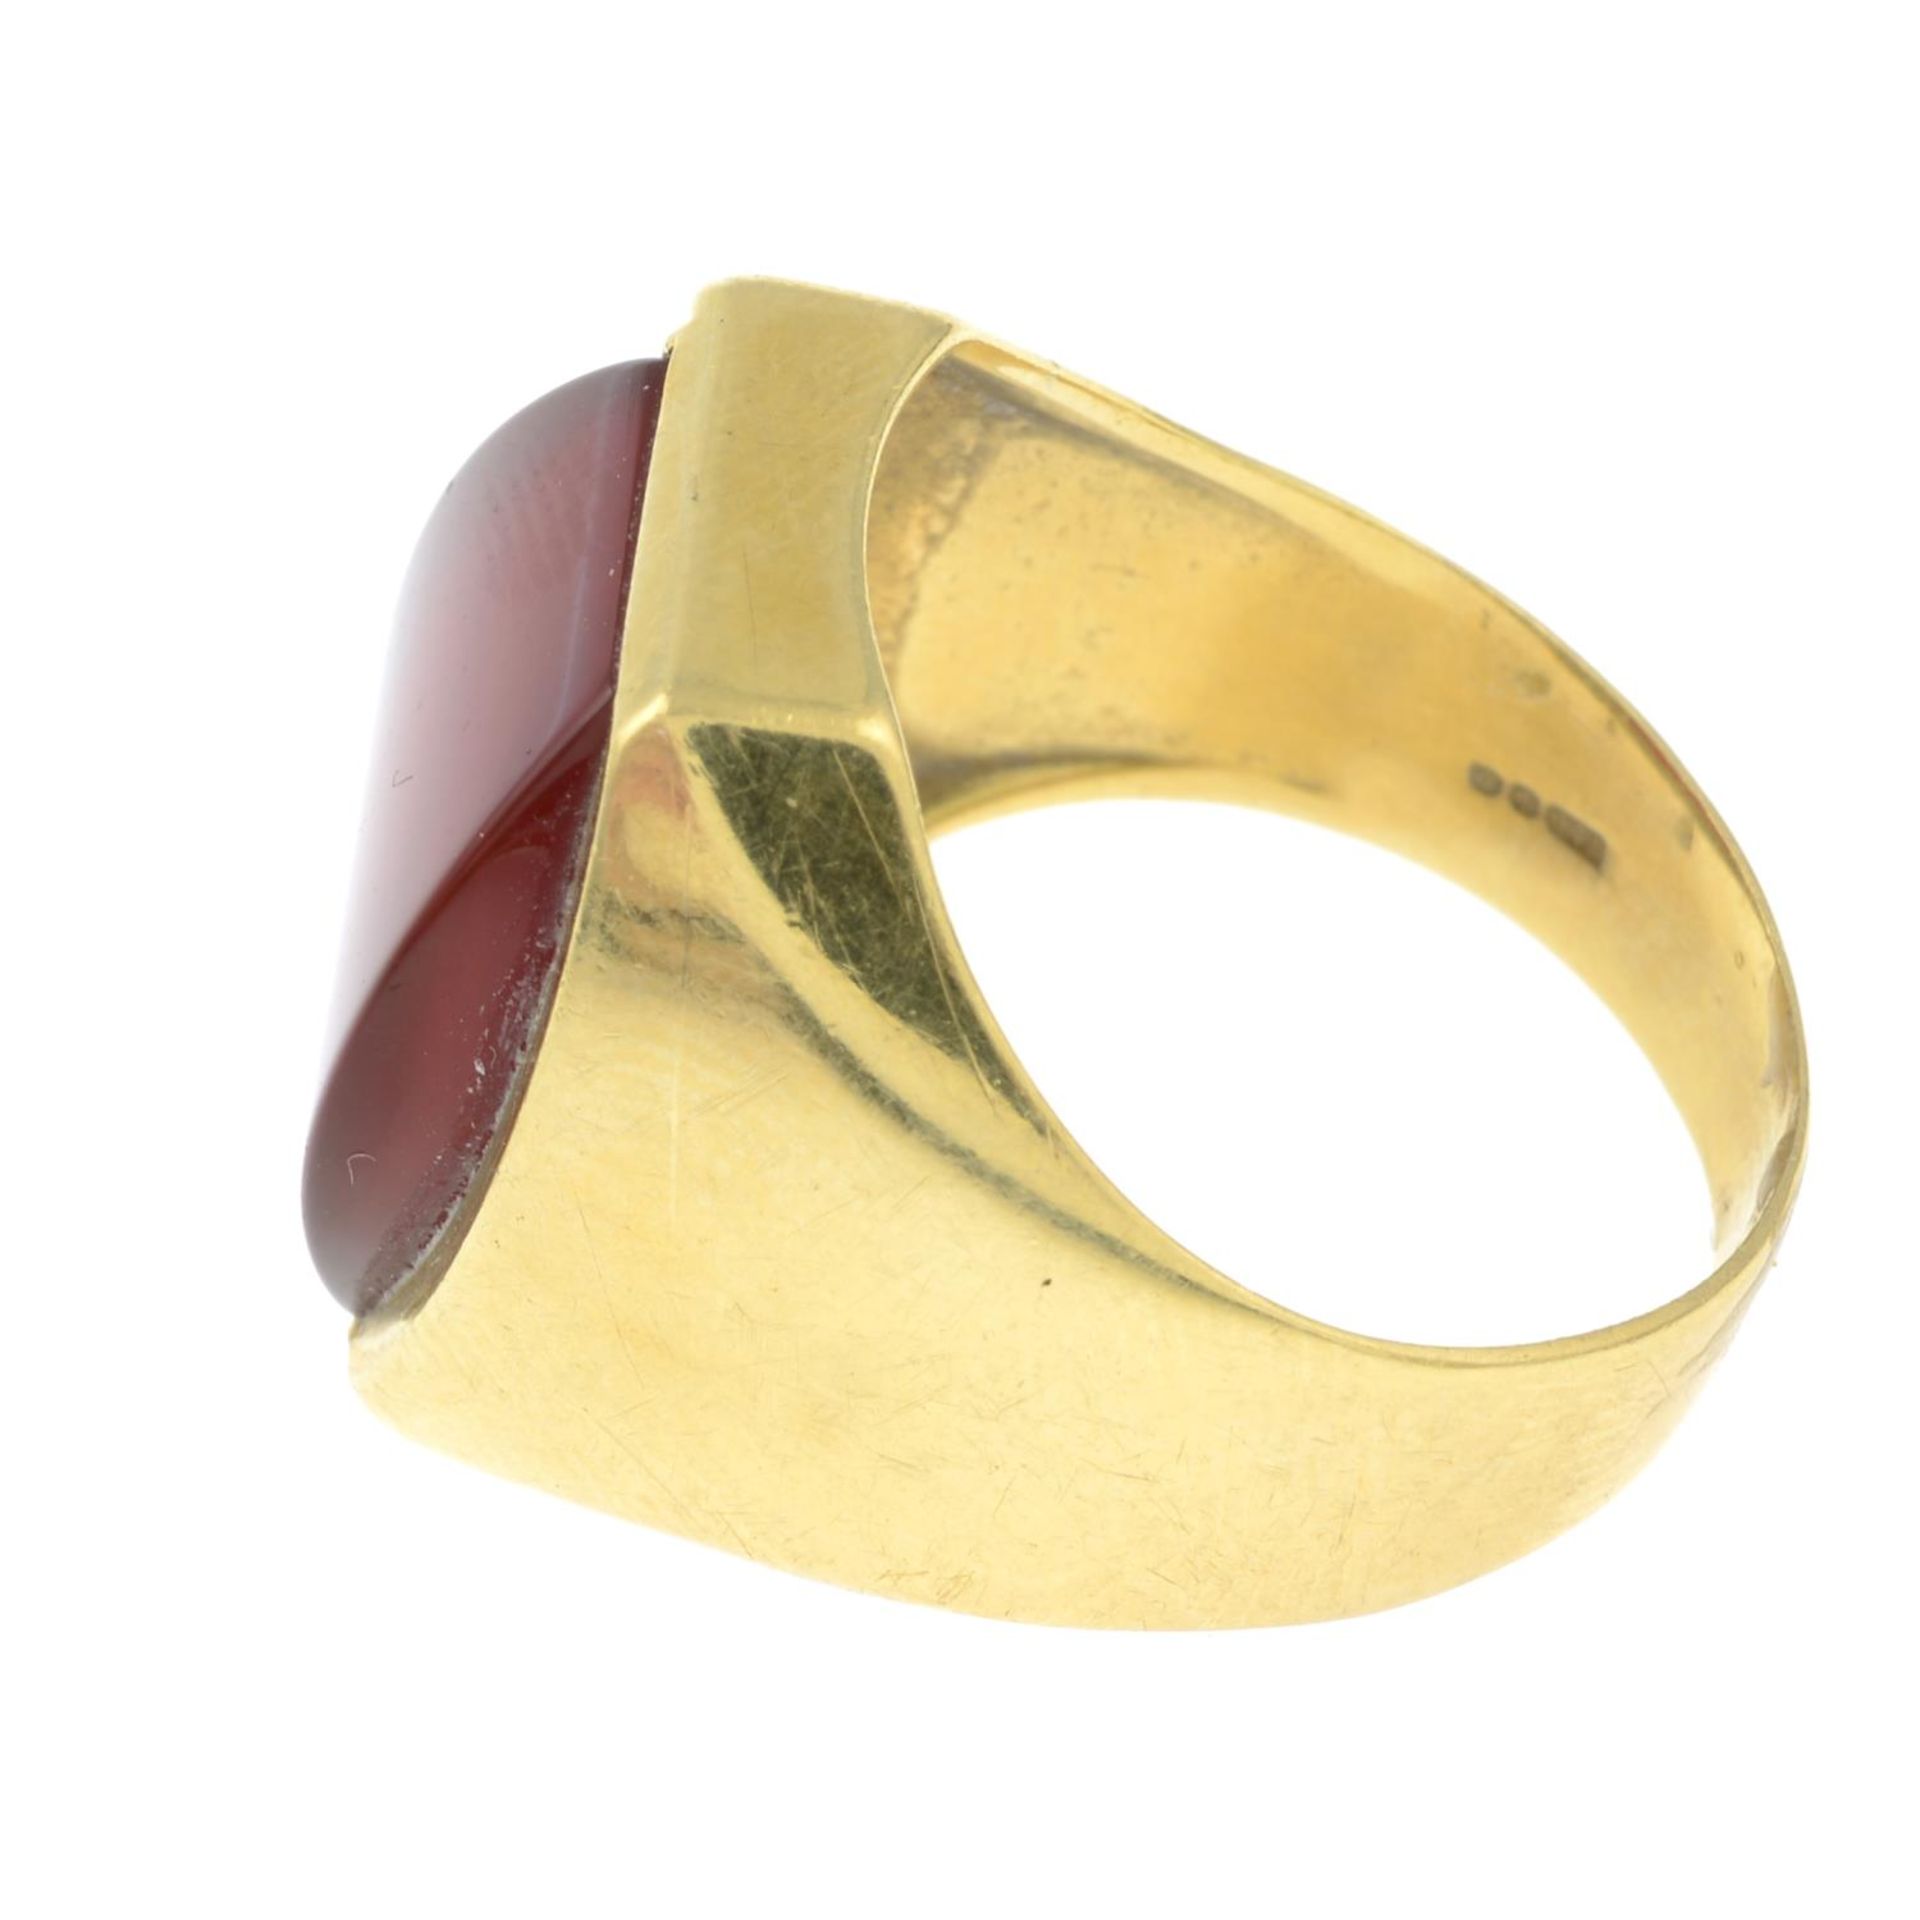 An 18ct gold carnelian signet ring.Import marks for 18ct gold. - Image 2 of 3